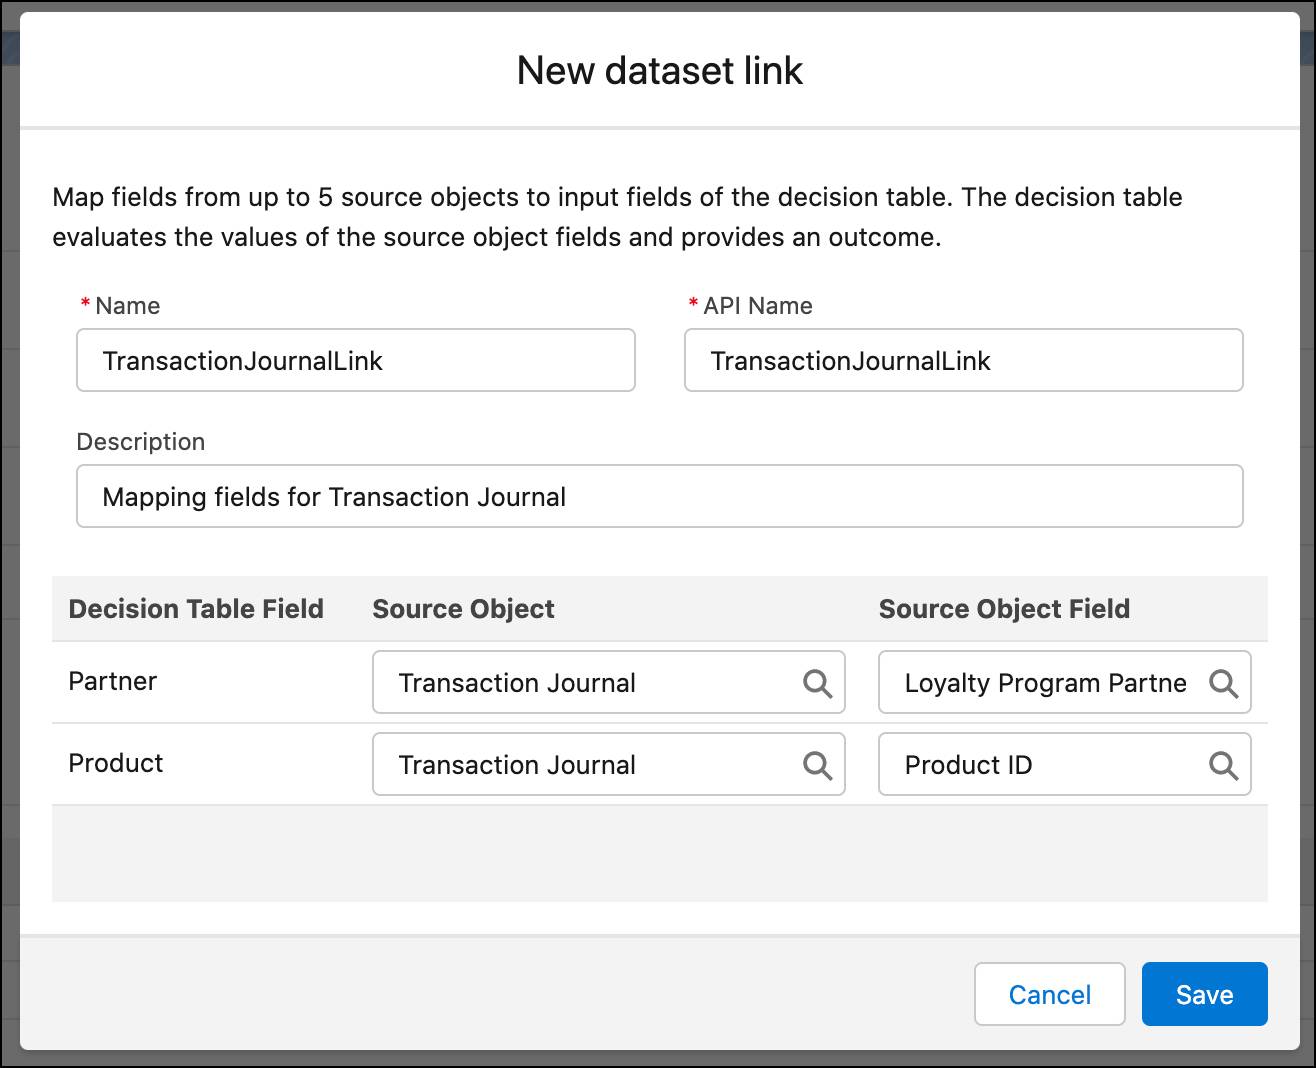 The New dataset link window where you map the decision table fields with those of the source object.